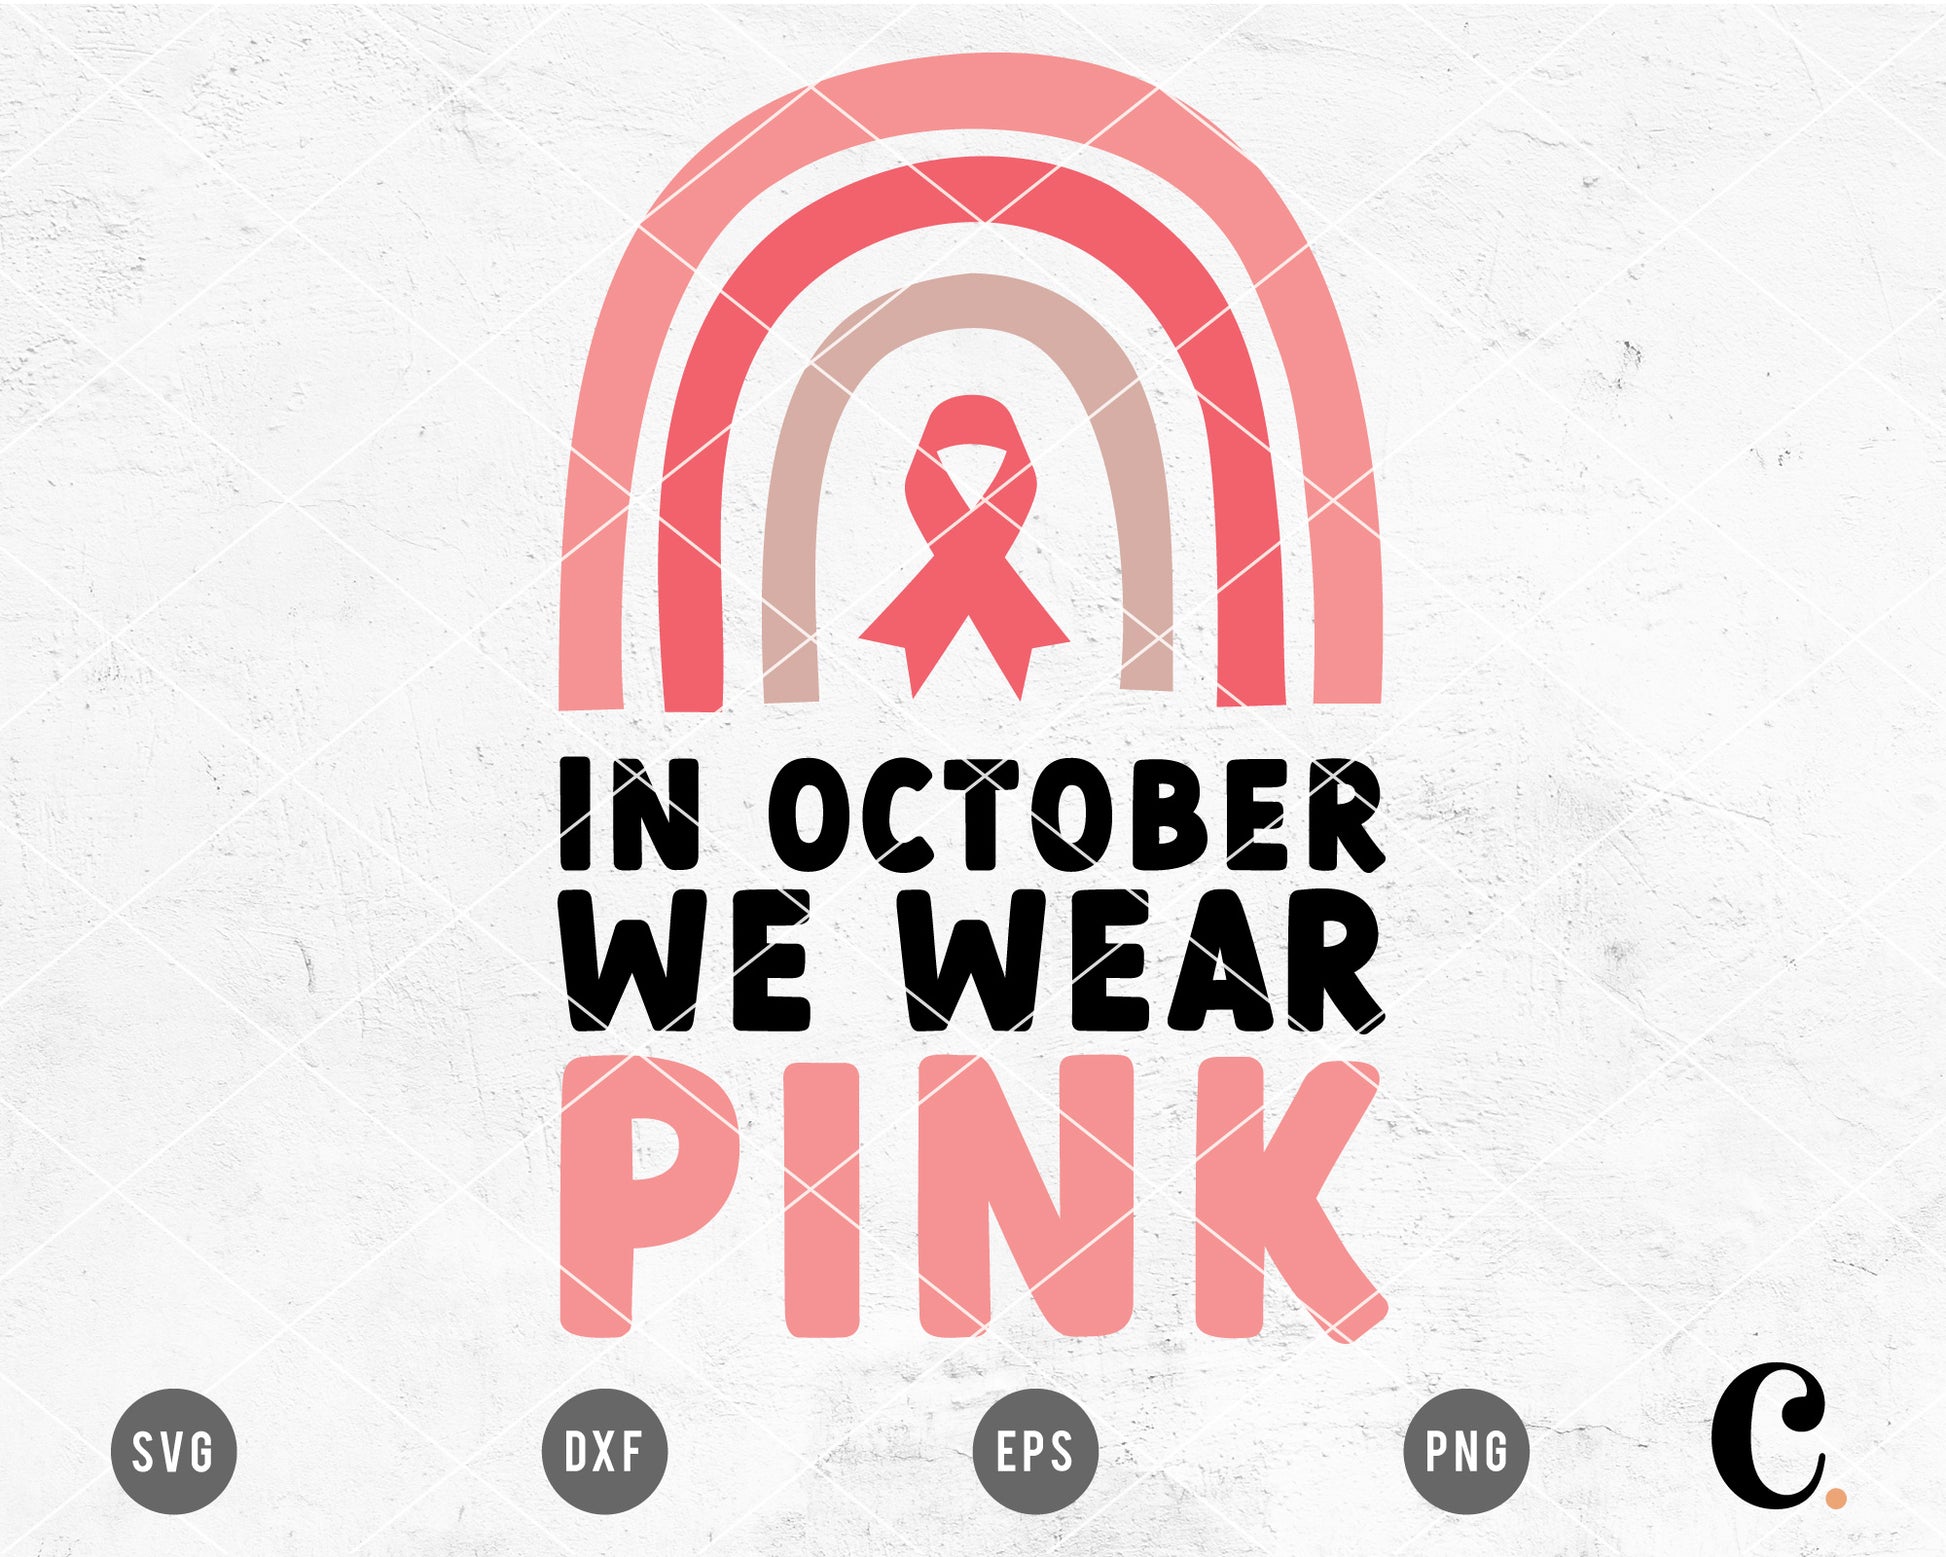 In October We Wear Pink SVG Cut File for Cricut, Cameo Silhouette | Breast Cancer Awareness SVG Cut File